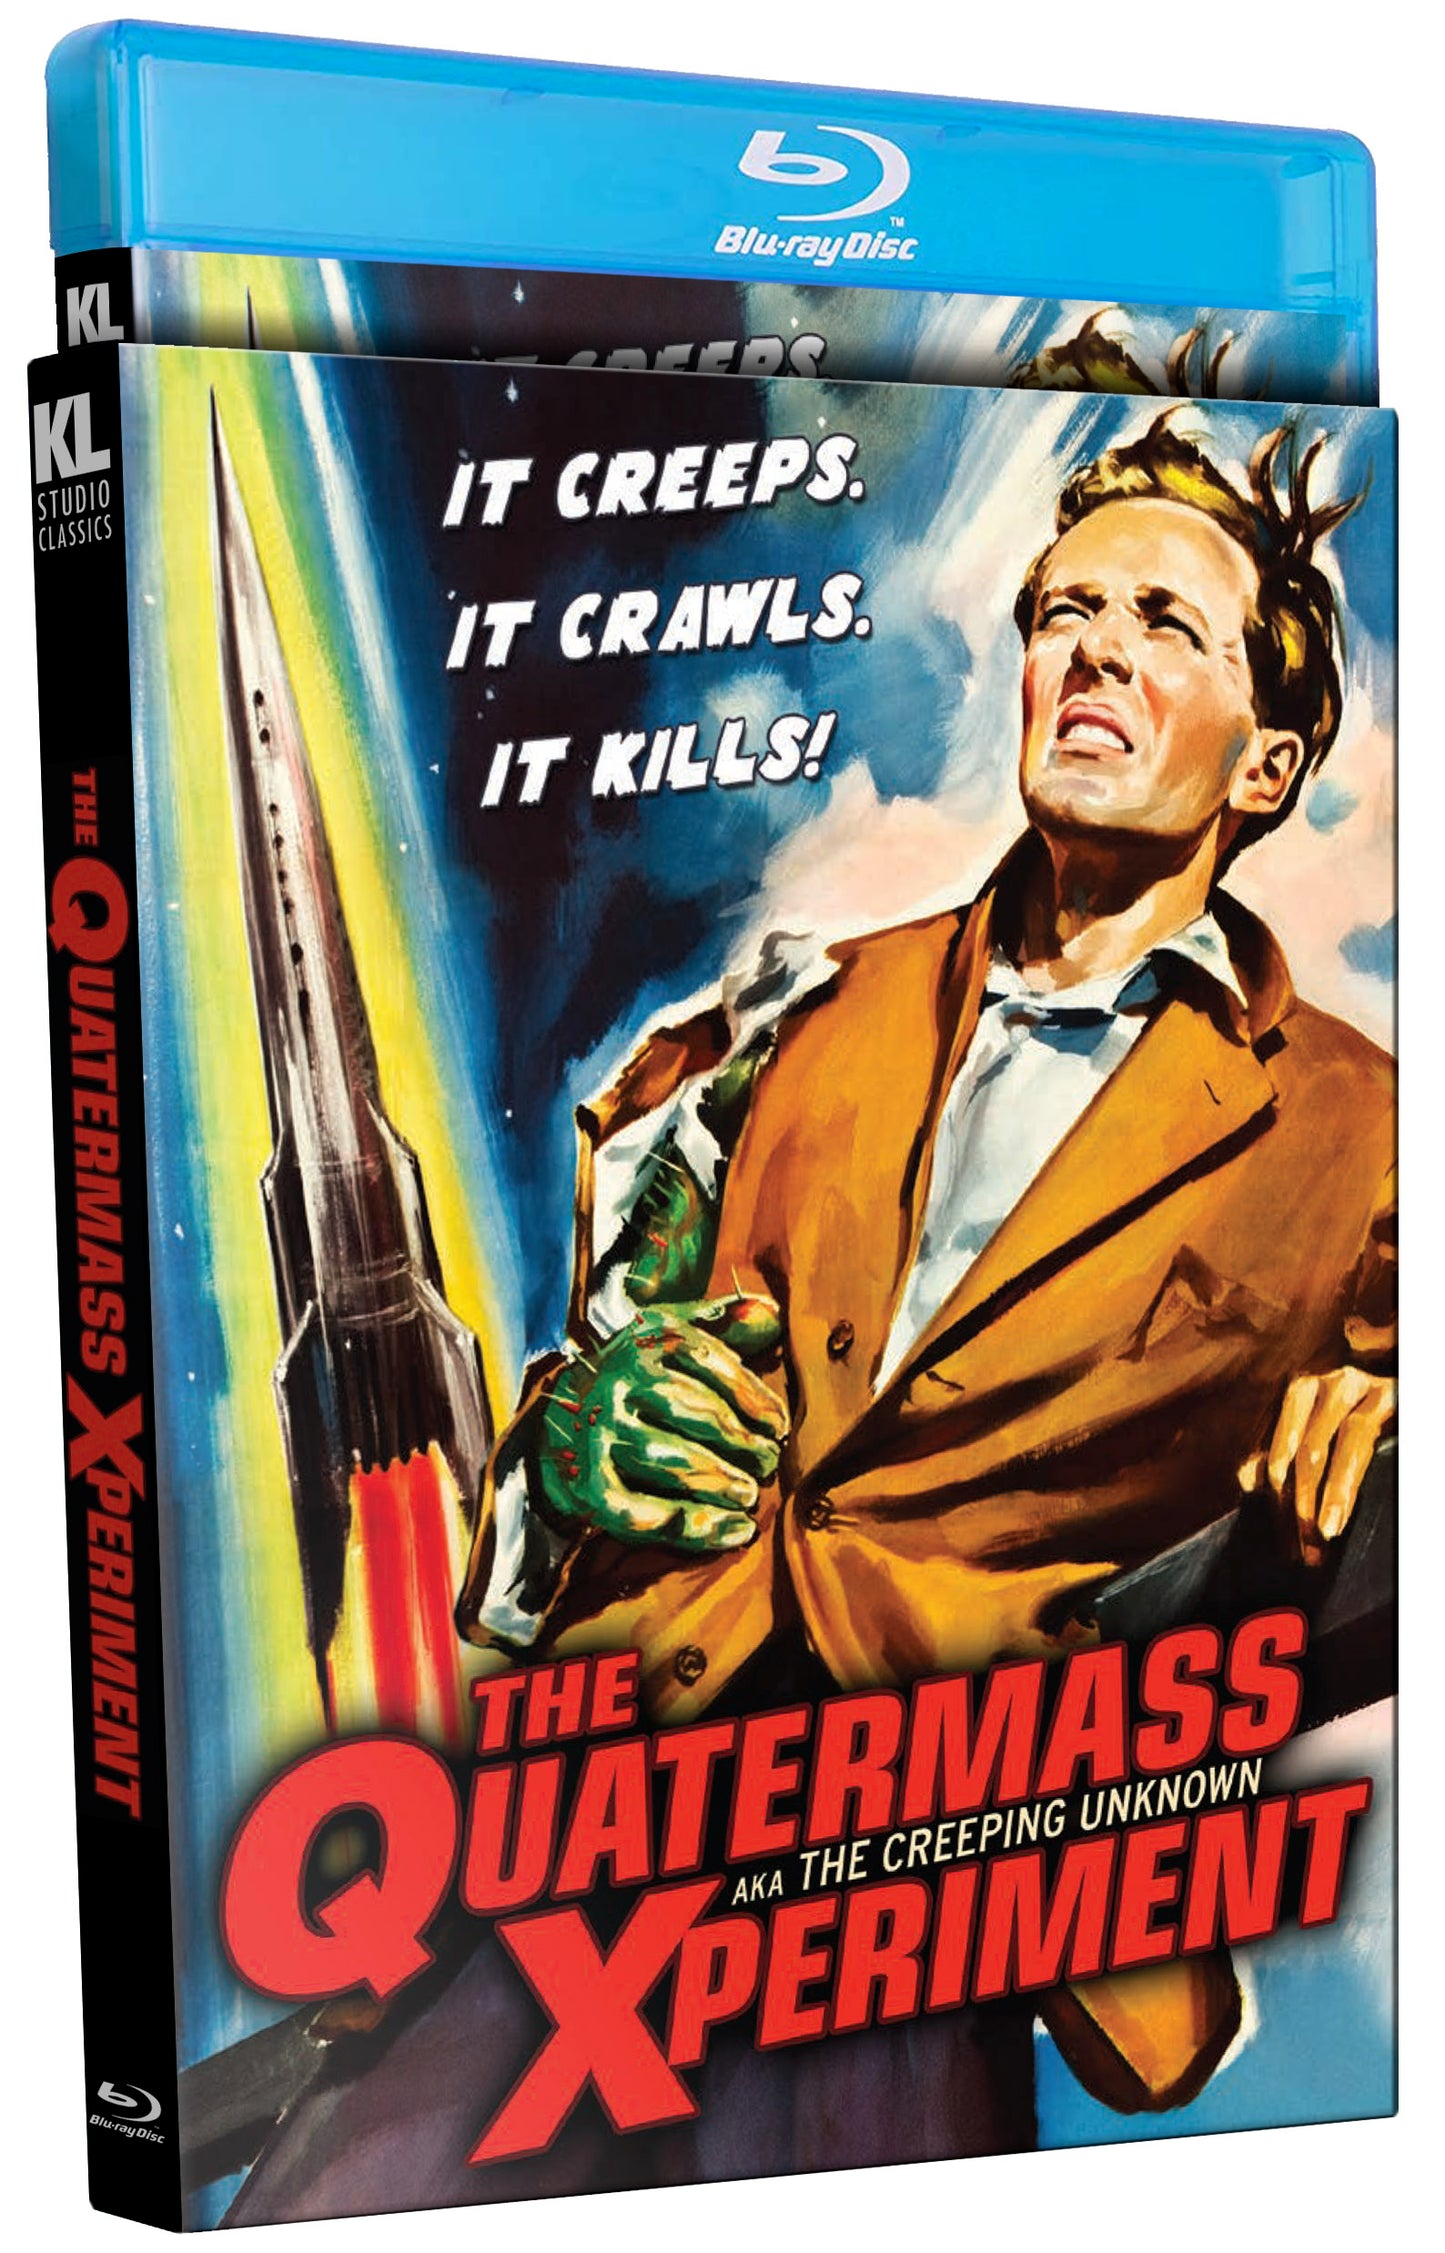 The Quartermass Xperiment Blu-ray Special Edition with Slipcover (Kino Lorber)